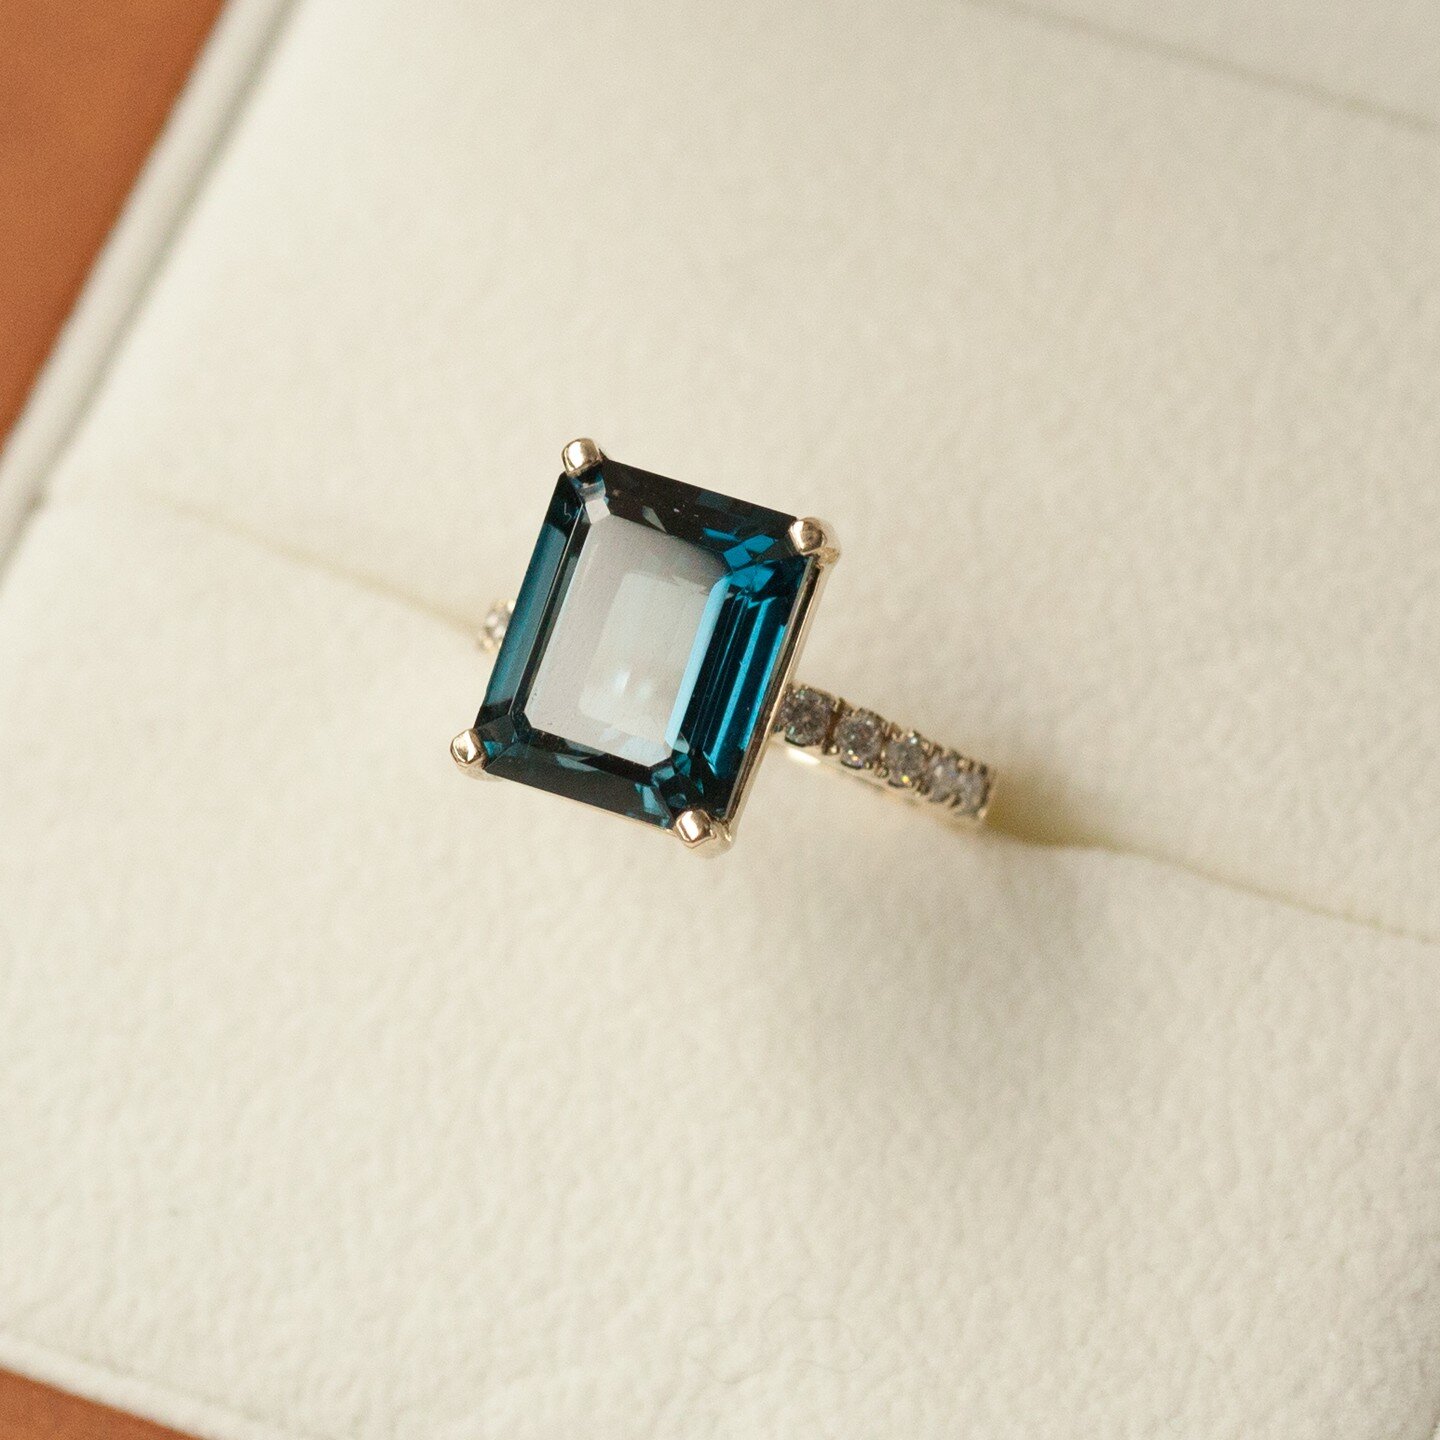 Dreaming of that European Mediterranean sea blue!

Striking deep blue-black hues with flashes of electric blue. This carefully picked London blue Topaz along side diamonds set in yellow gold makes a signature piece to brighten any occasion. 

#lovego